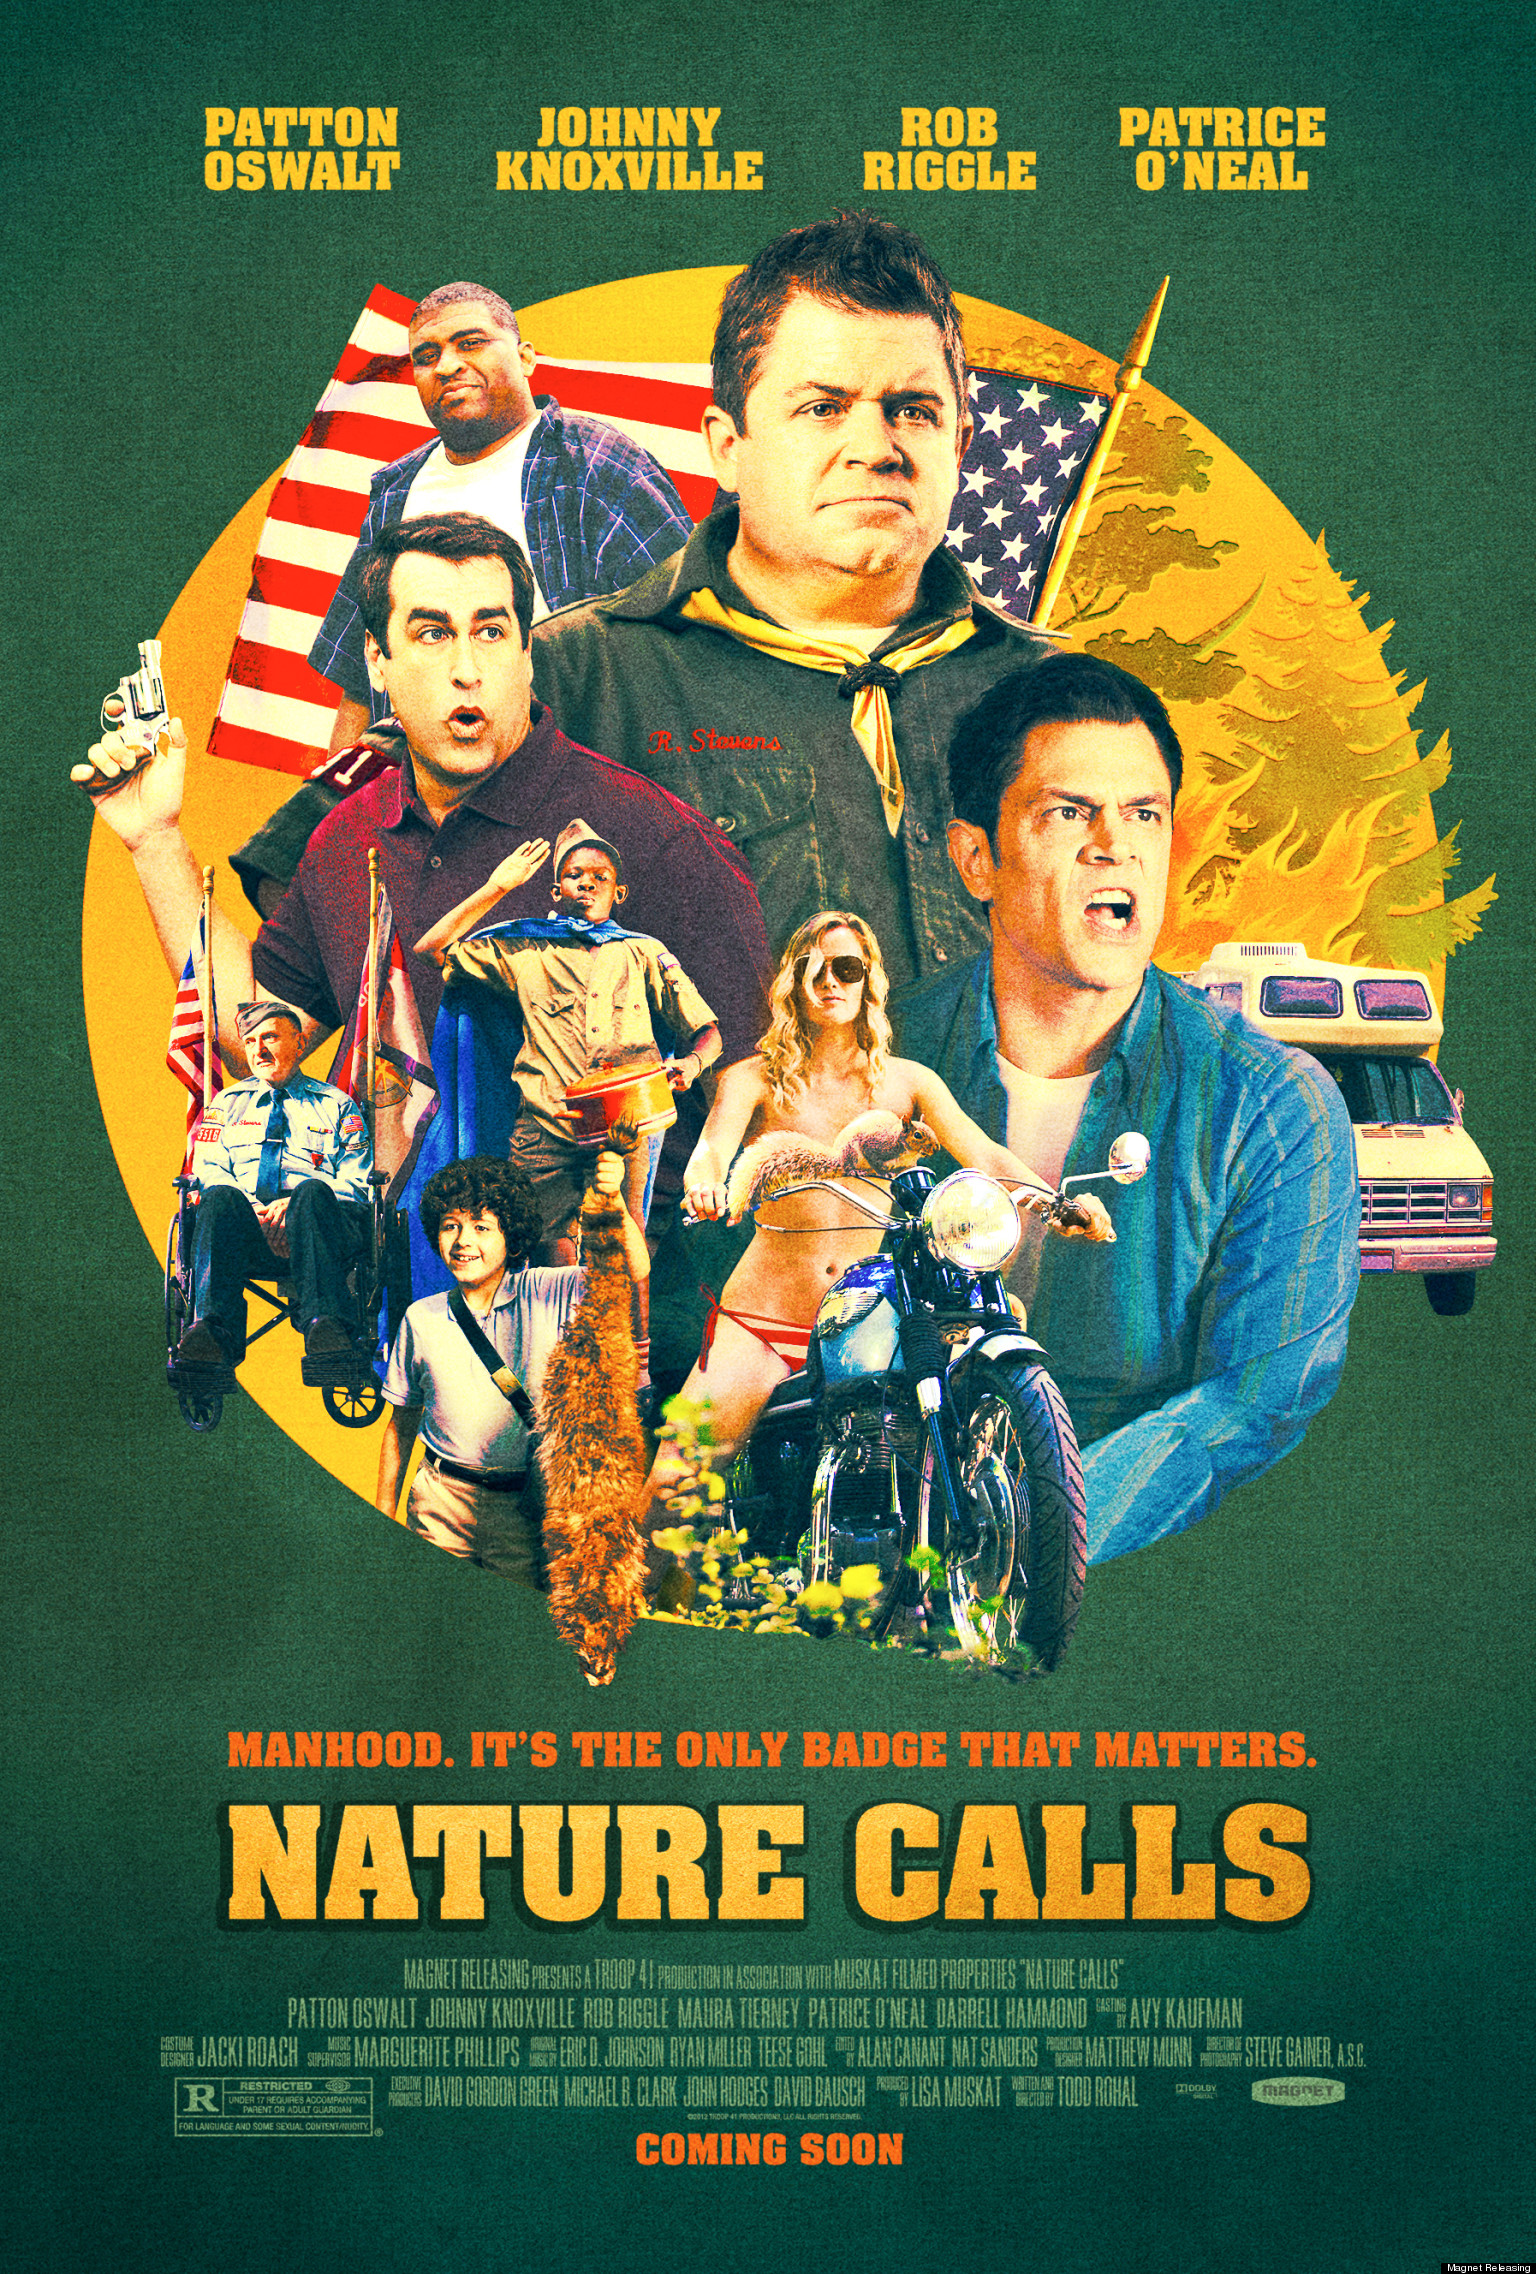 'Nature Calls' Poster: First Look At Patrice O'Neal's Final Film With Patton Oswalt ...1536 x 2274